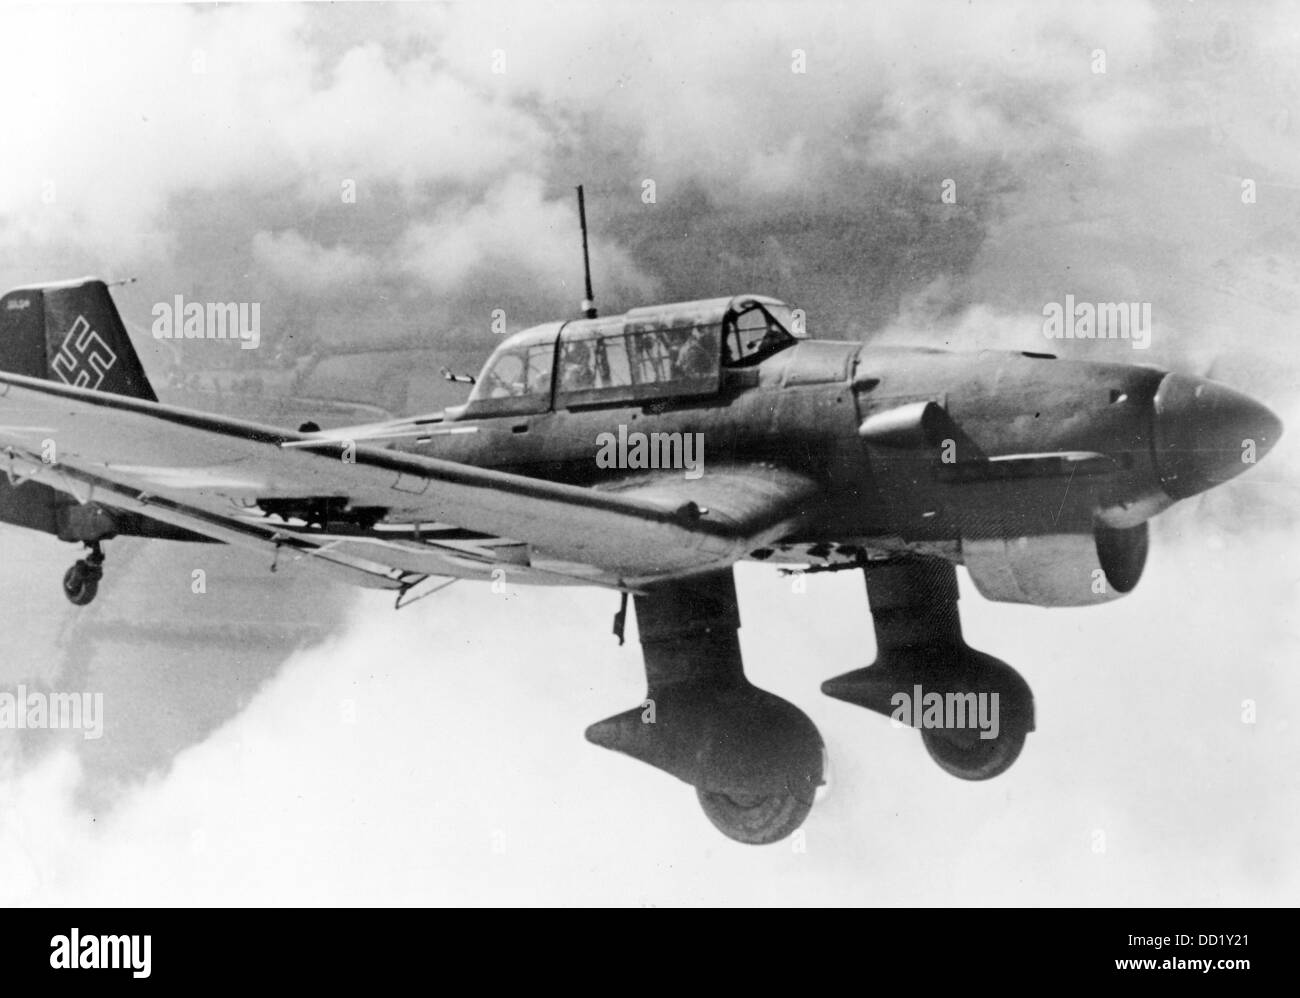 The image from the Nazi Propaganda! shows the dive bomber Junkers Ju 87 in action for the German Wehrmacht in December 1940. Fotoarchiv für Zeitgeschichte Stock Photo